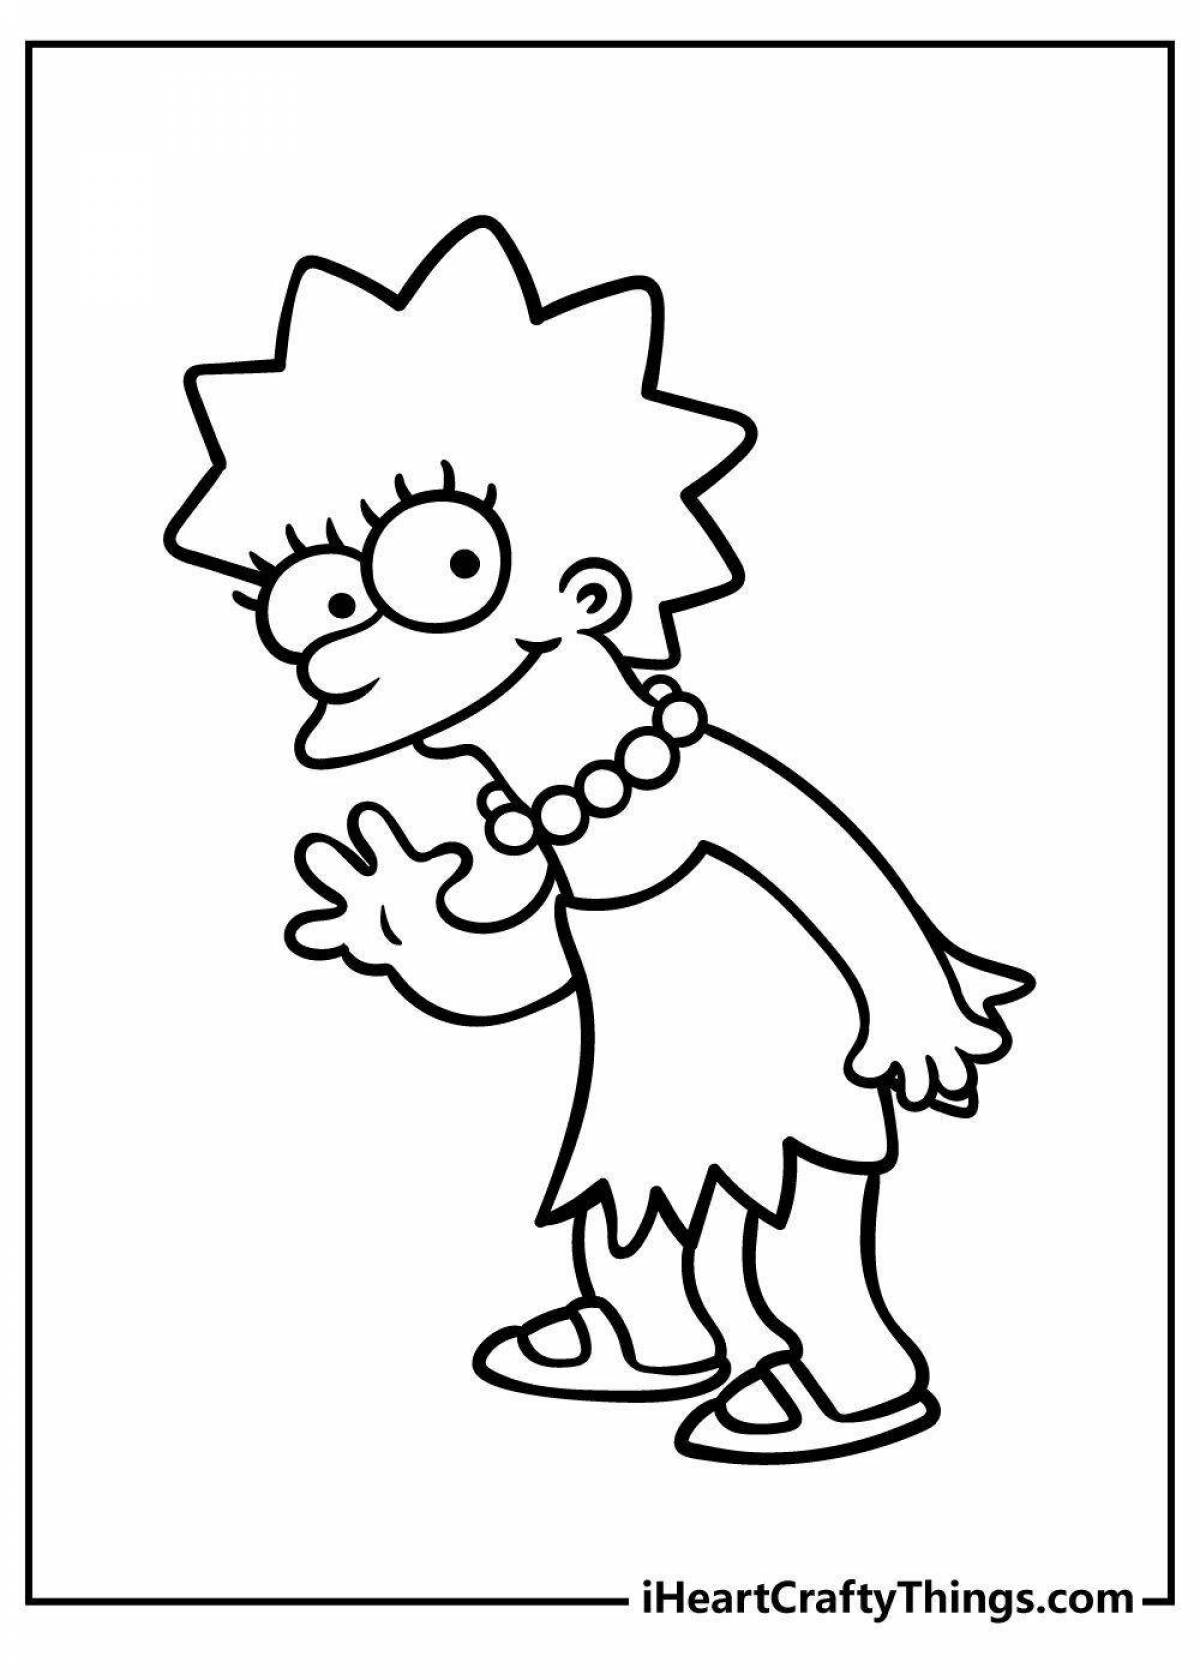 Lisa simpson colorful coloring page